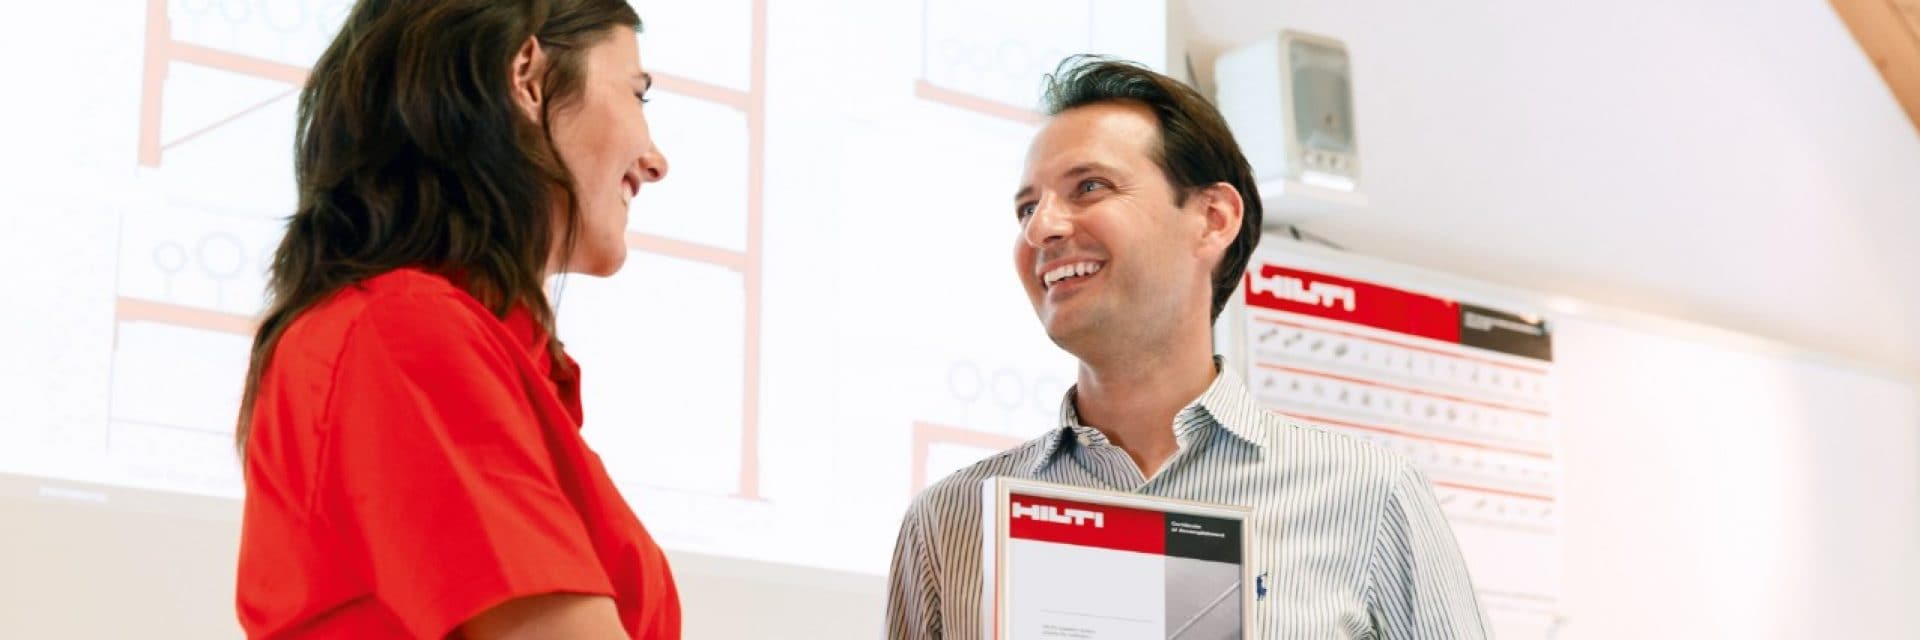 Hilti chemical products training